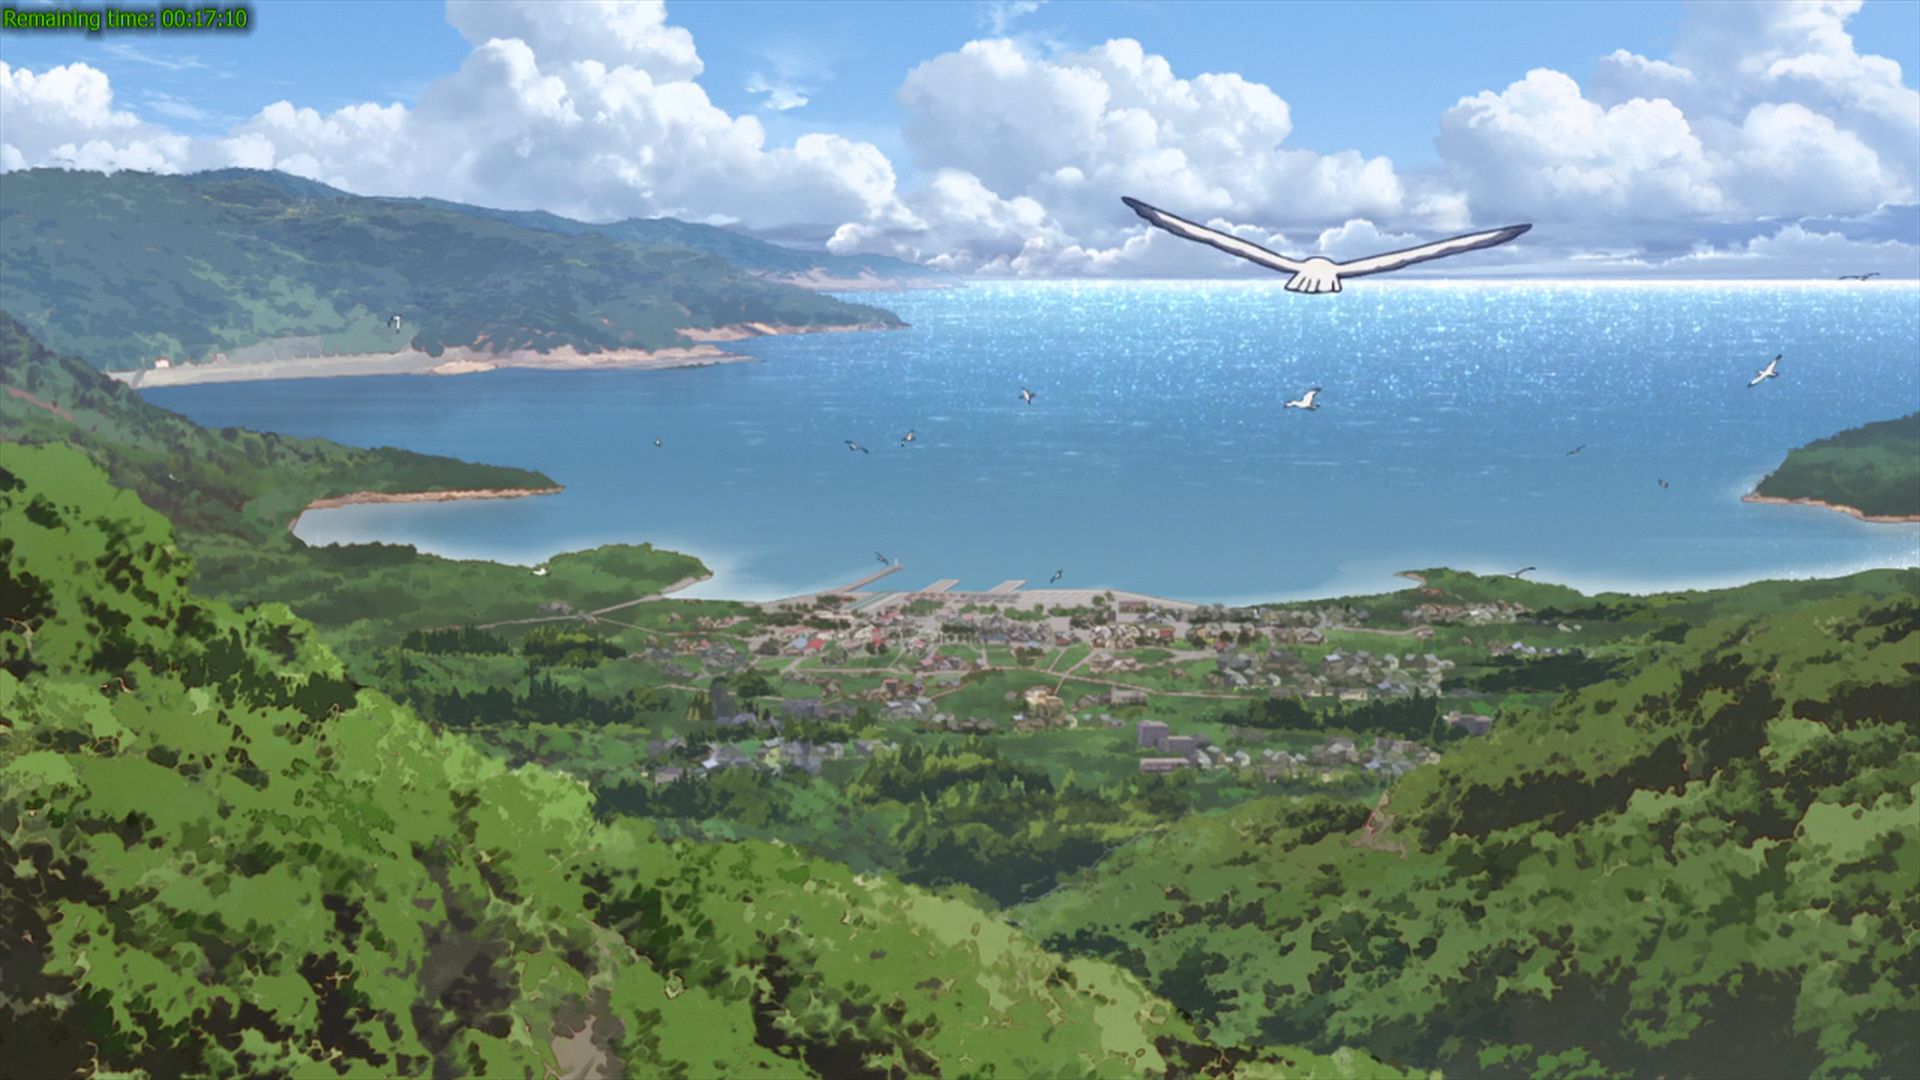 The static pre-painted background style seen in Princess Lover is also common in this anime.